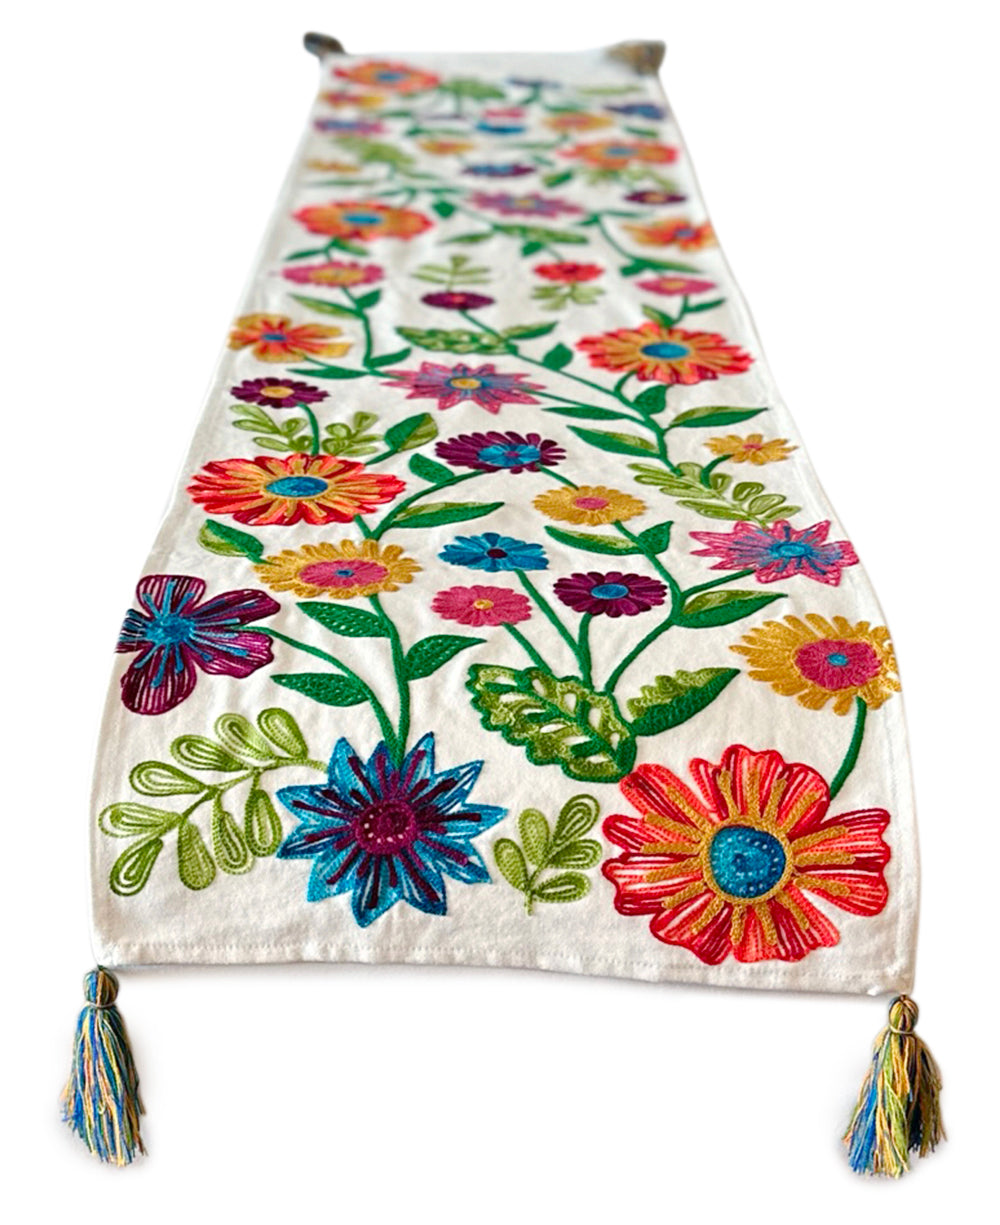 Floral Design Vibrant Suzani Embroidered Table Runner